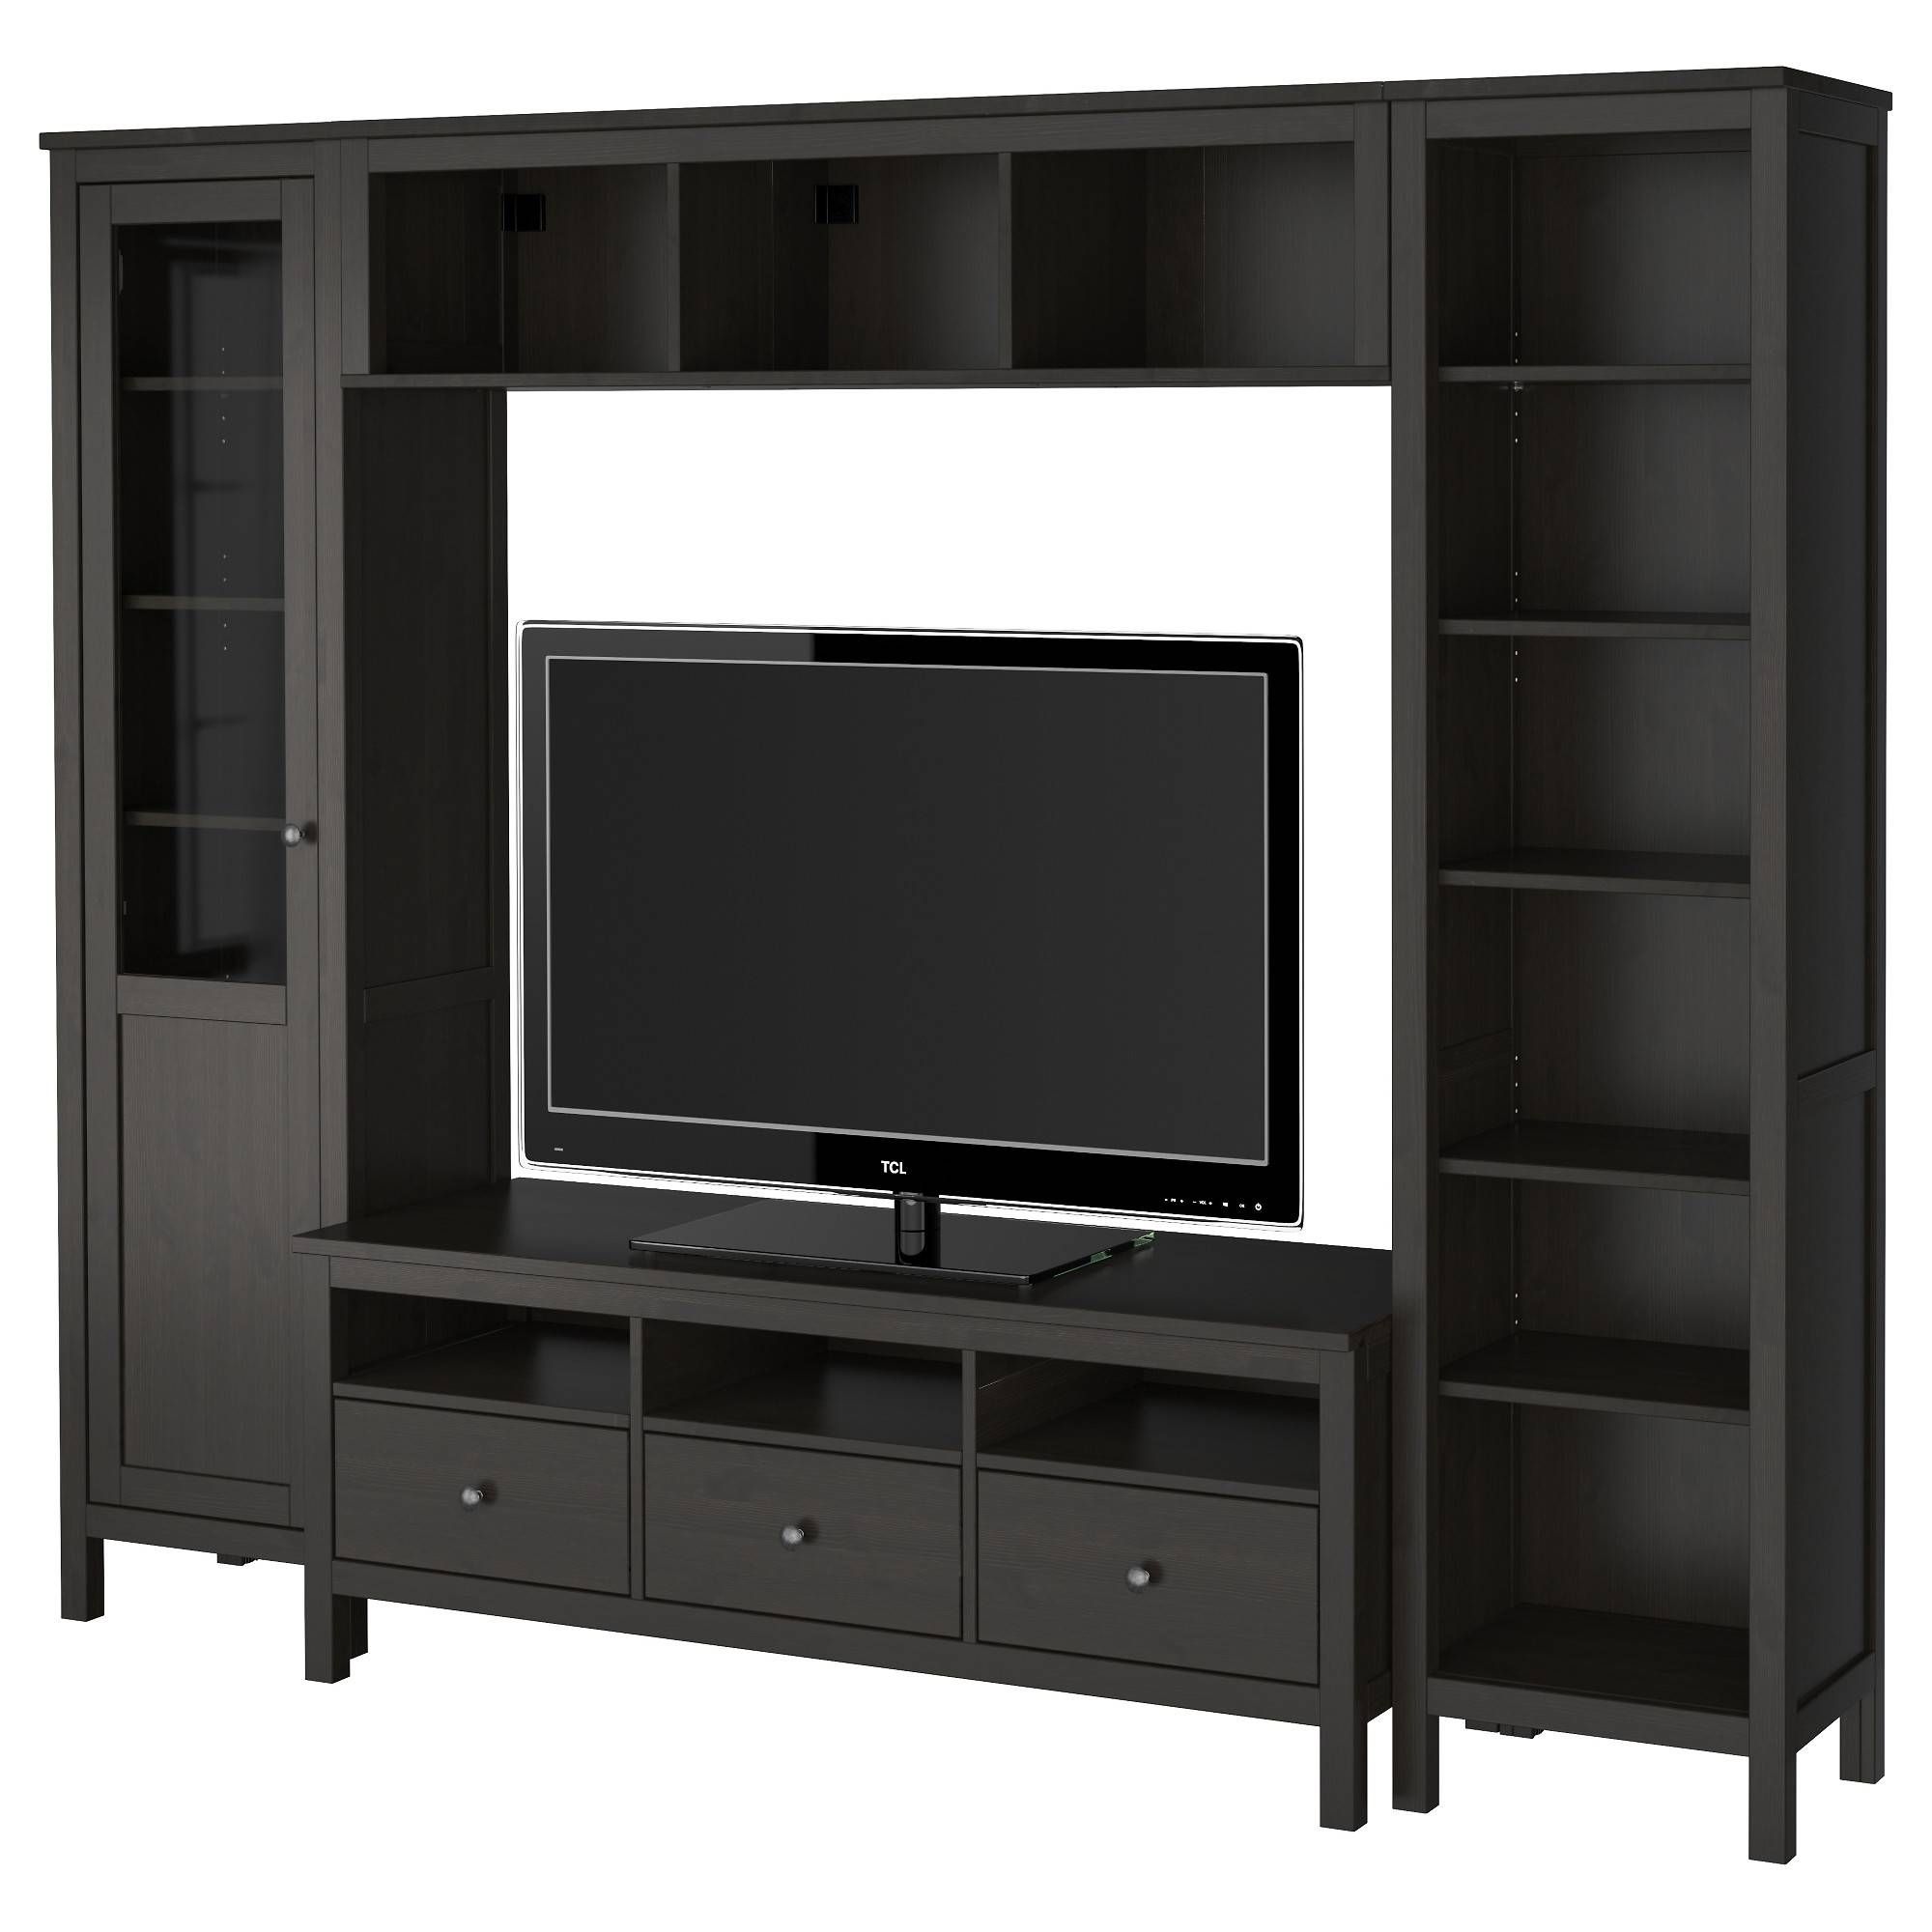 Black Tv Stand Or Tv Stand With Hutch Also Tall Tv Stand Plus For Tv Stands With Drawers And Shelves (View 8 of 15)